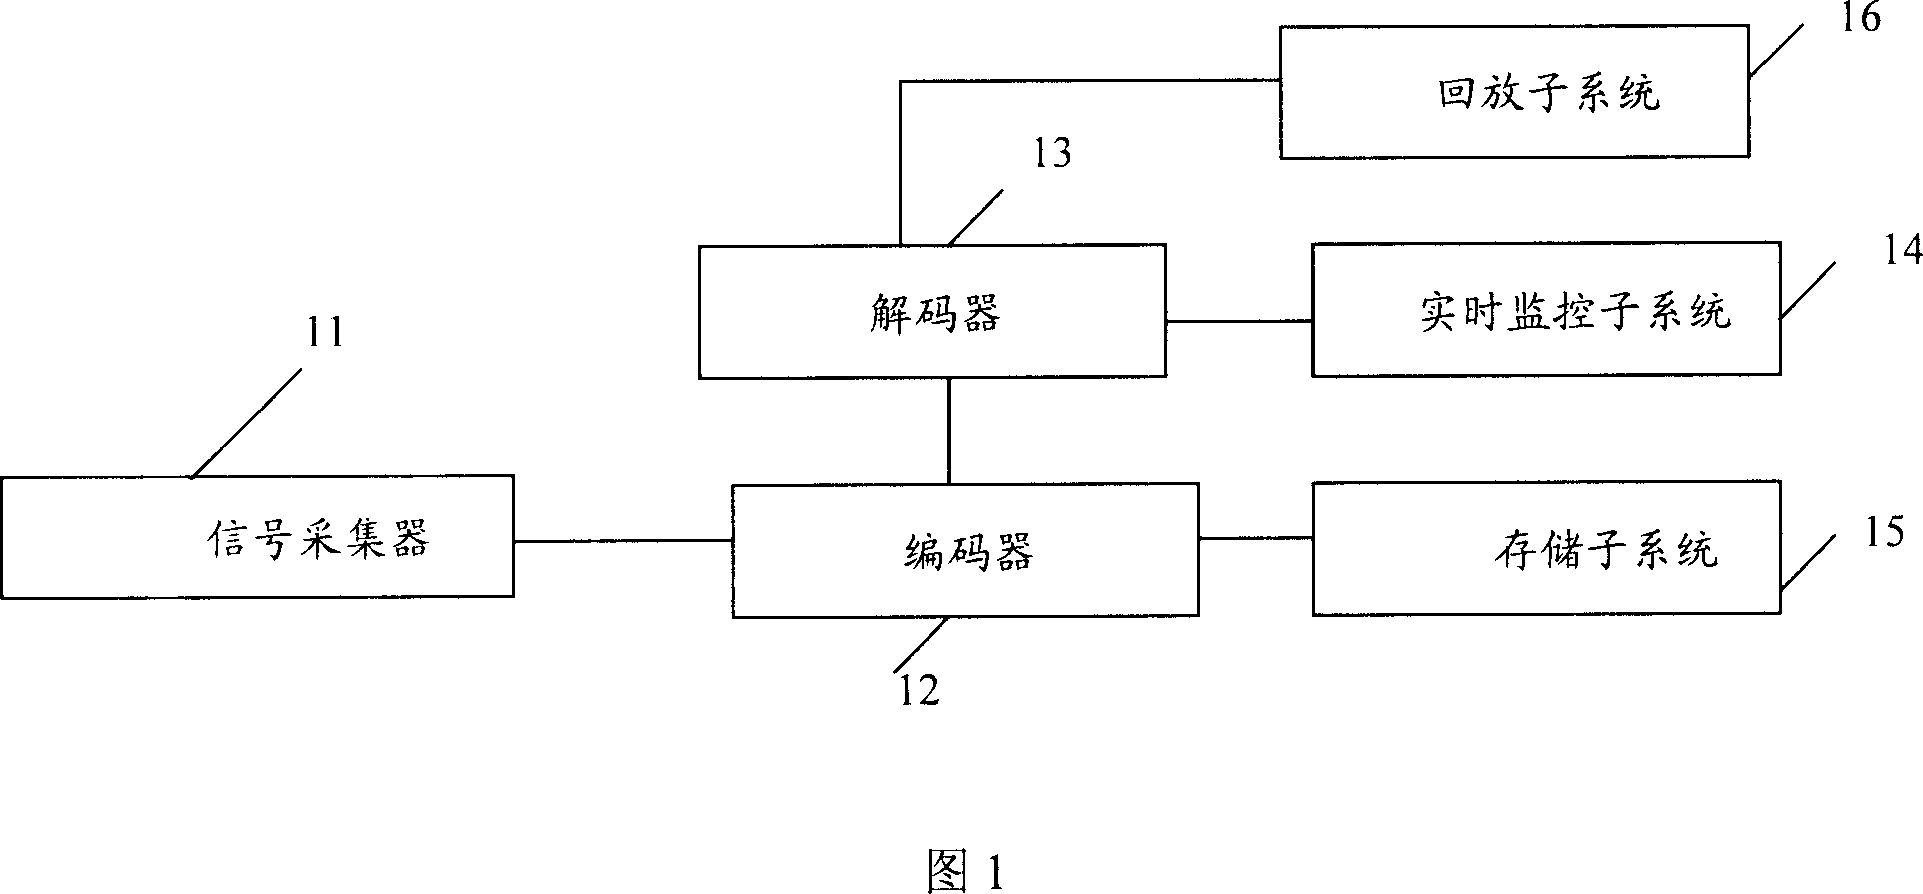 Frequency-video monitoring system and data compression dump device